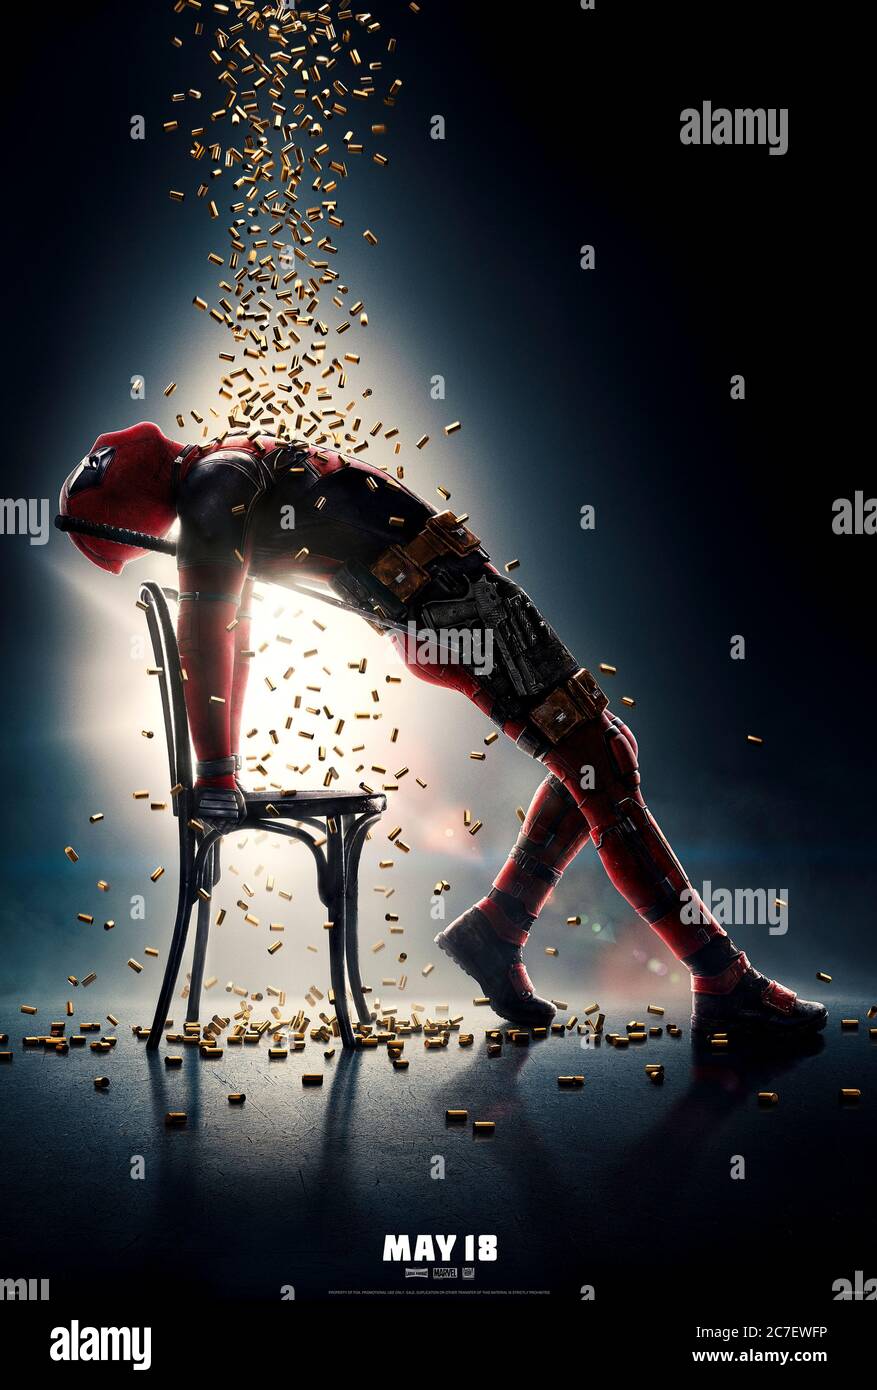 Deadpool 2 (2018) directed by David Leitch and starring Ryan Reynolds, Josh Brolin, and Morena Baccarin. Wade Wilson returns for more irreverent fun. Stock Photo